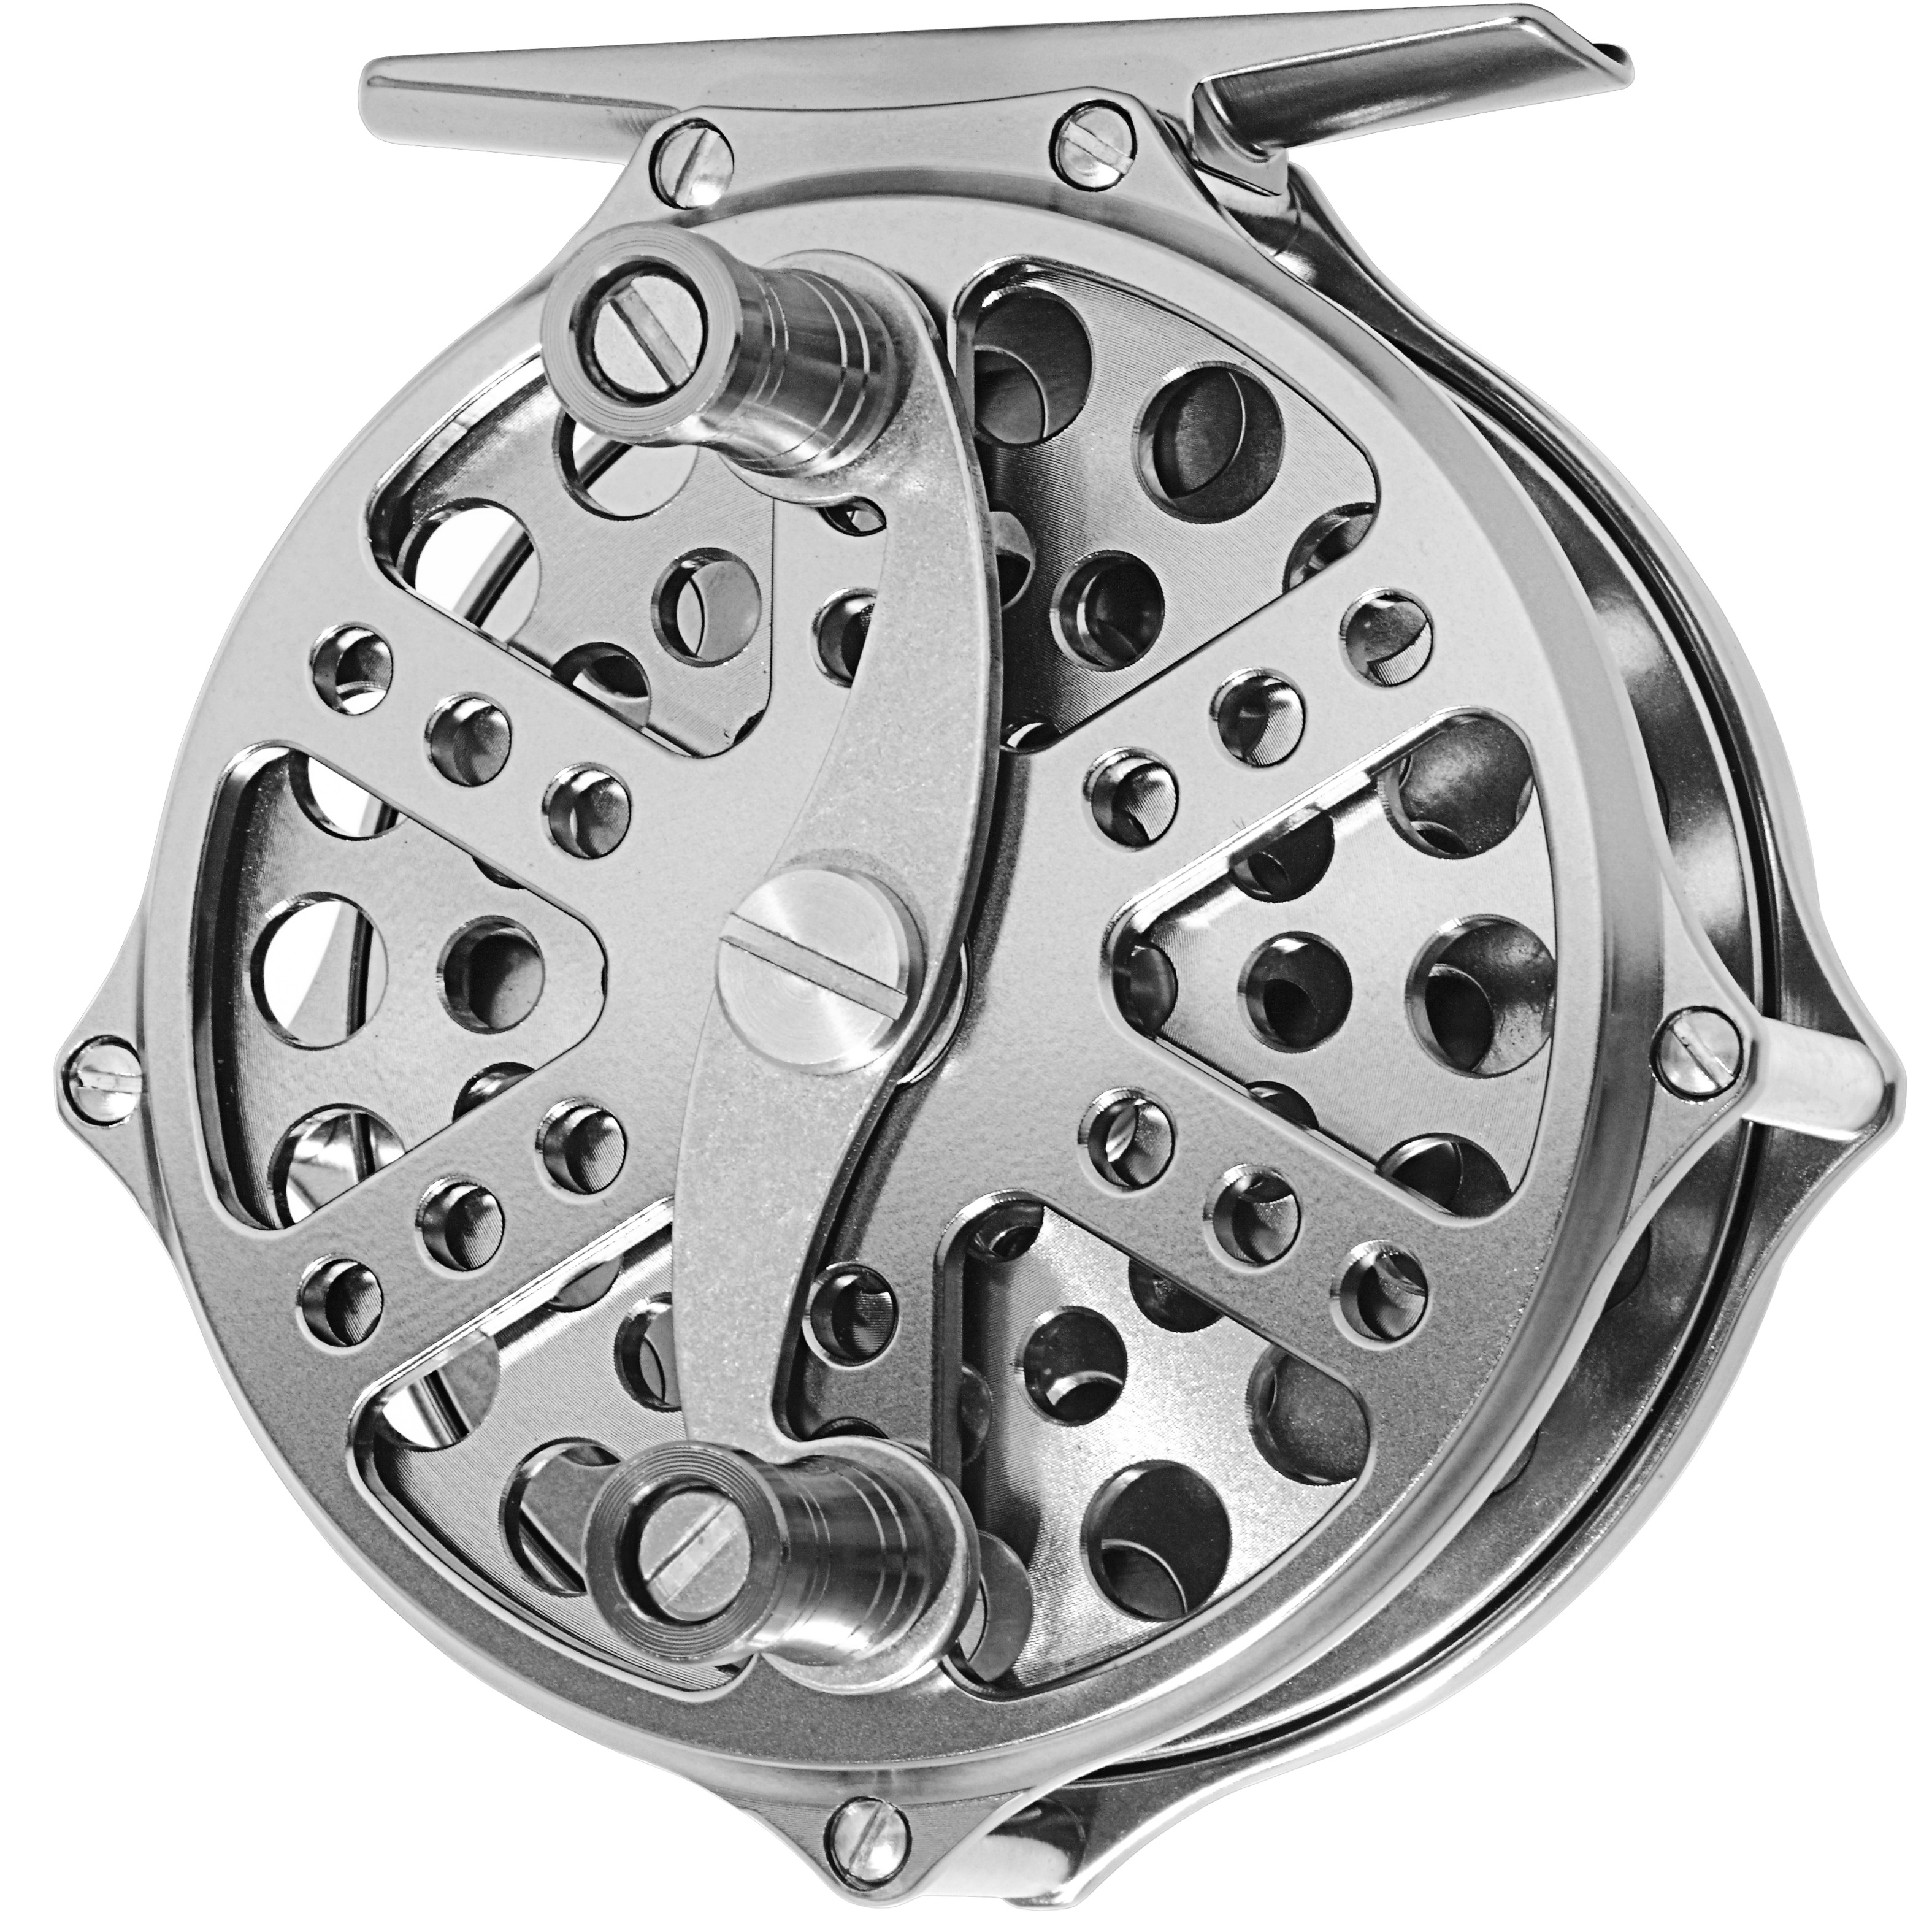 3/4wt Classic Fly Fishing Reel Click and Pawl CNC Machined Aluminum Freshwater Trout Fishing.